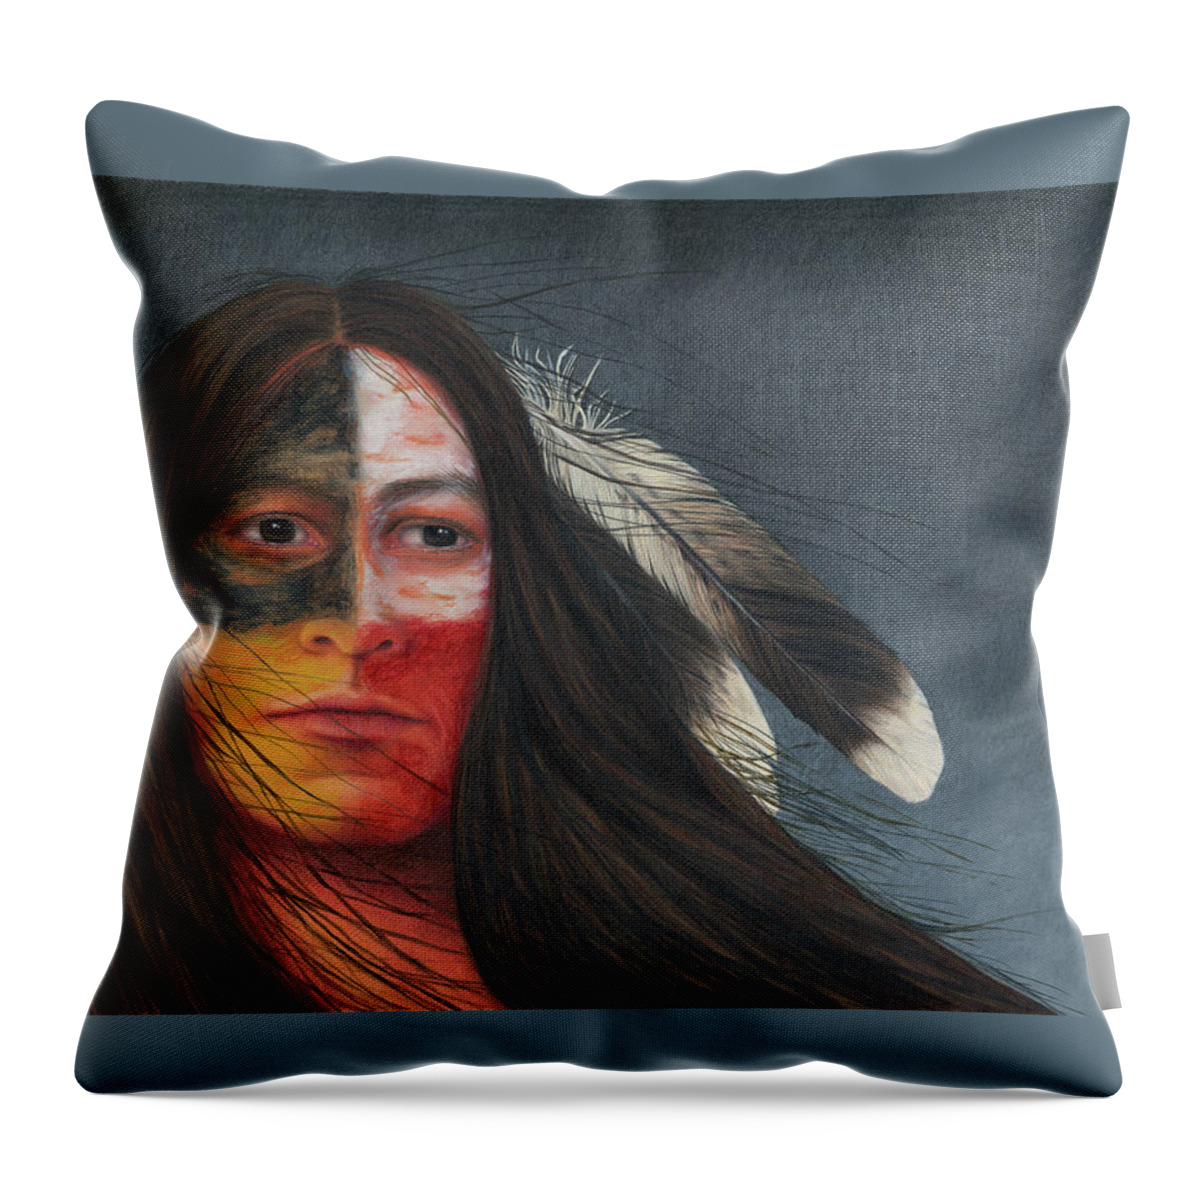 Native American; American Indian; Eagle Feathers; Medicine Wheel; Long Flowing Hair Throw Pillow featuring the painting Medicine Man by Valerie Evans